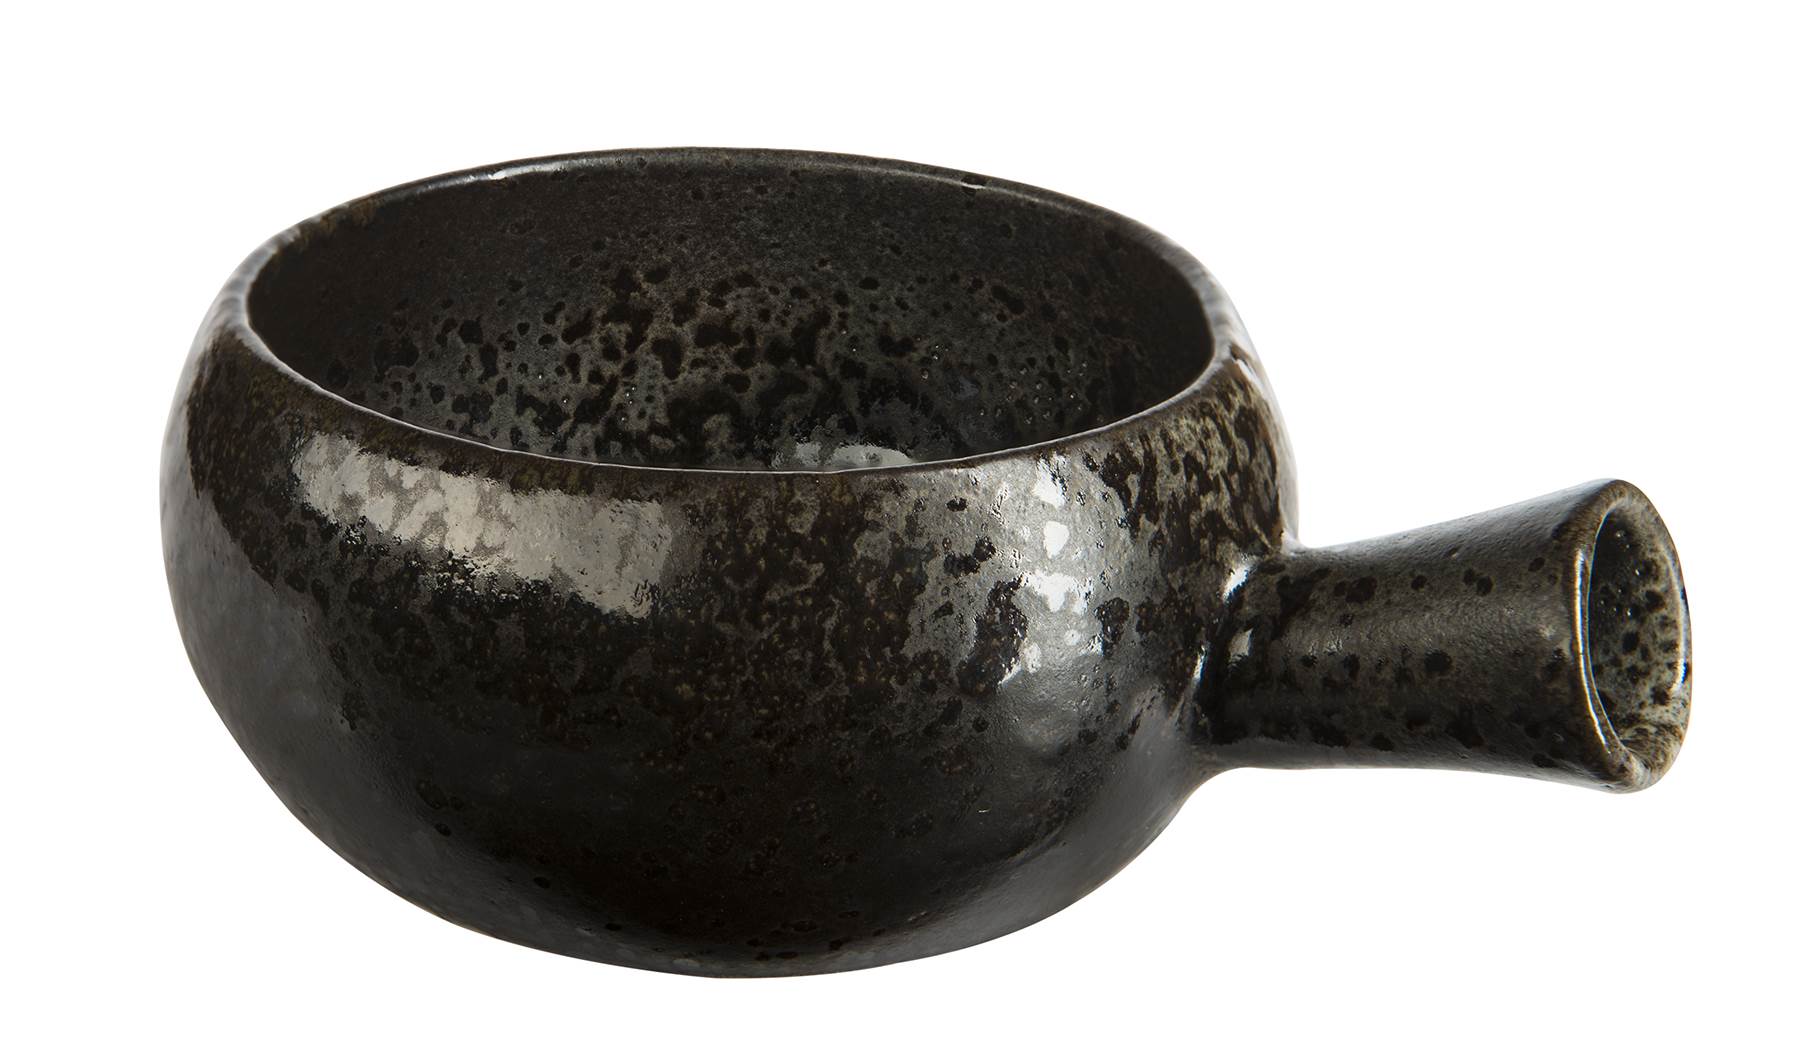 DPS BLACK IRONSTONE HANDLED SOUP CUP 56clDPS-C52907